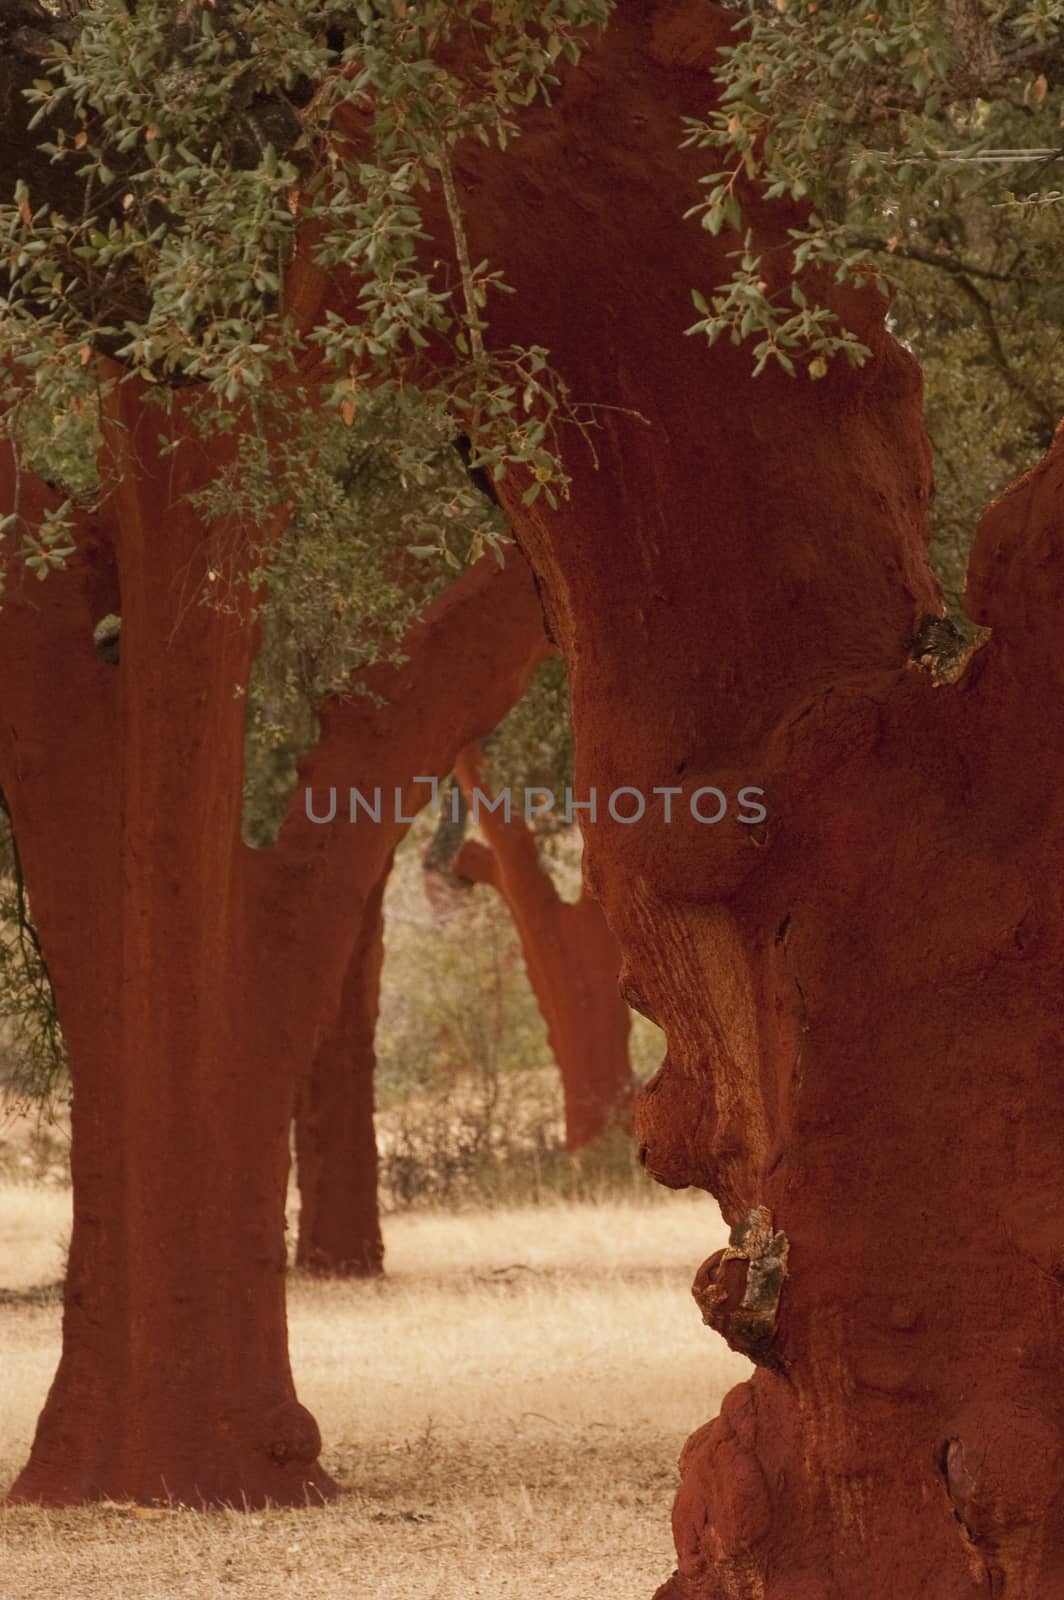 Cork oak after the extraction of the cork, (Quercus suber), Spain